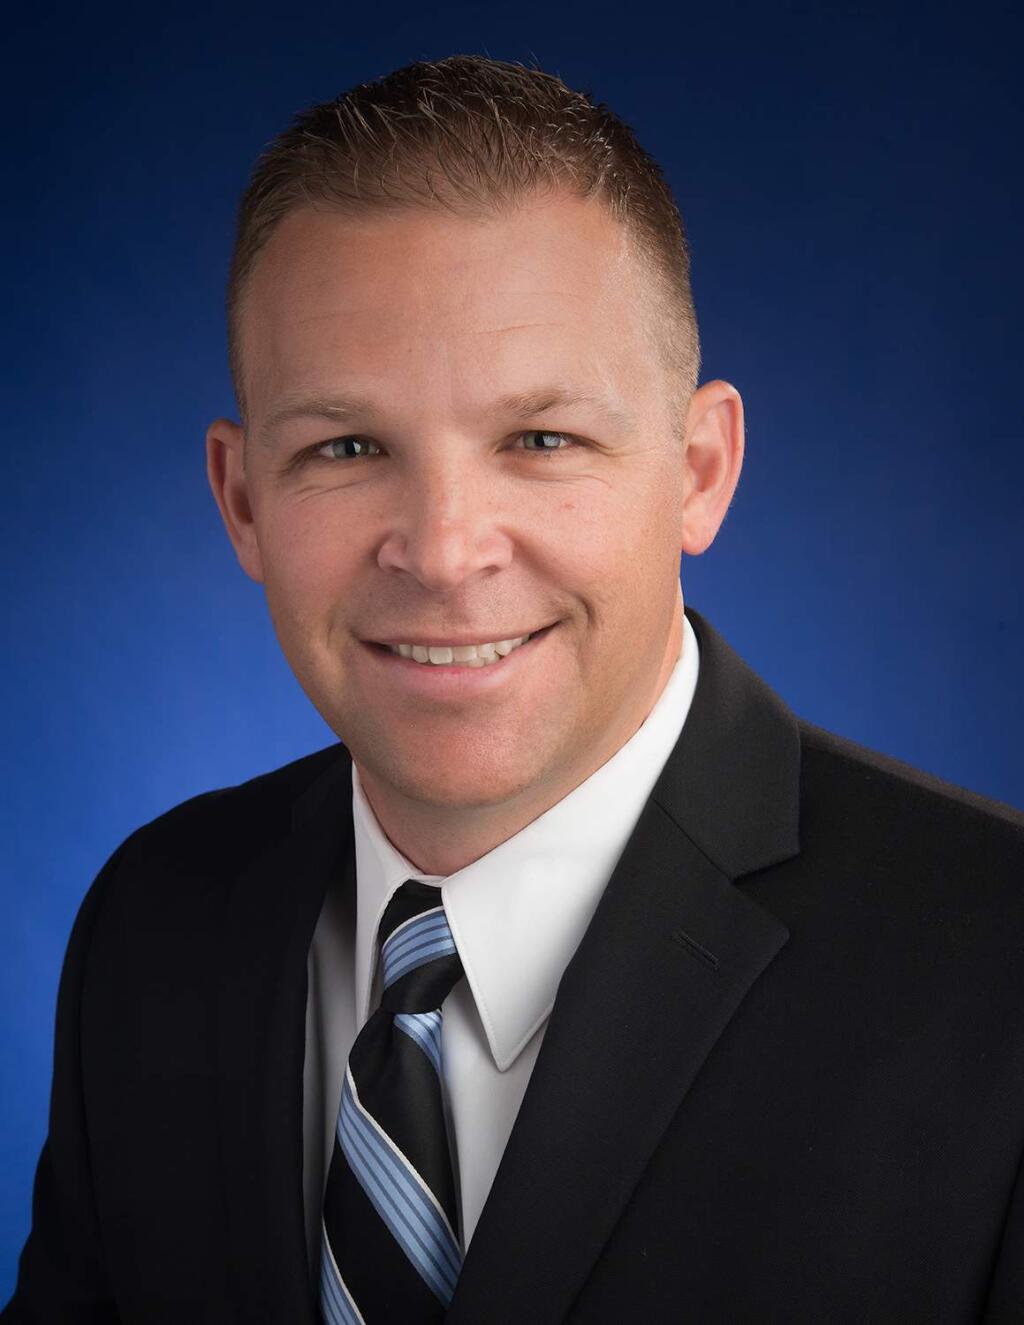 Dave Homan is a certified financial planner with Willow Creek Wealth Management of Sebastopol.